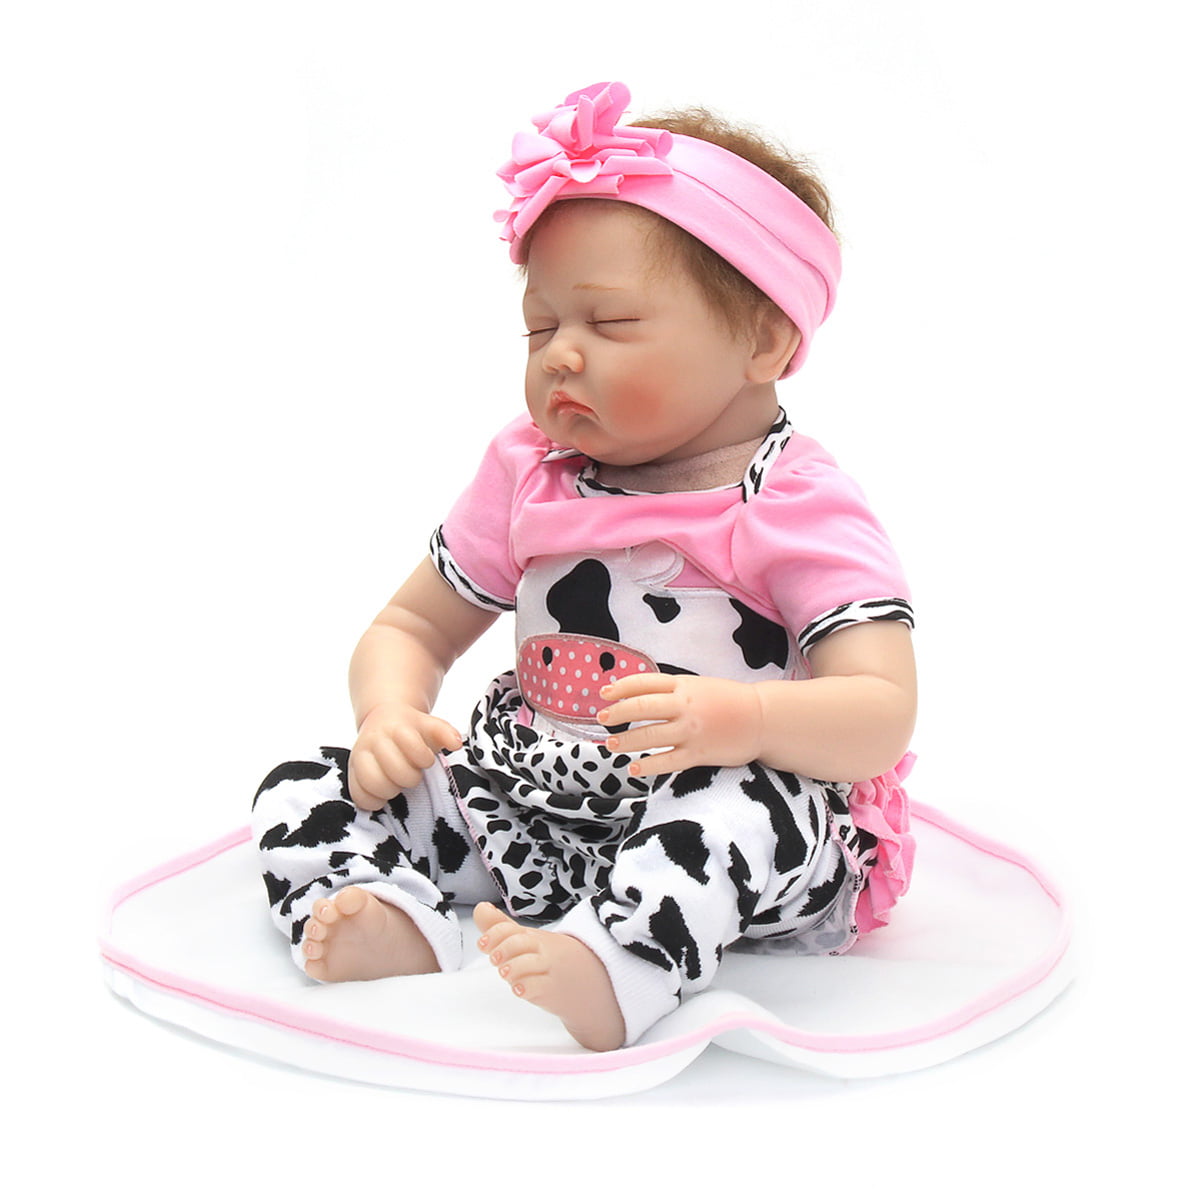 Details about   22" Baby Girl Real Doll Full Body Soft Silicone Vinyl Handmade Newborn Baby Doll 